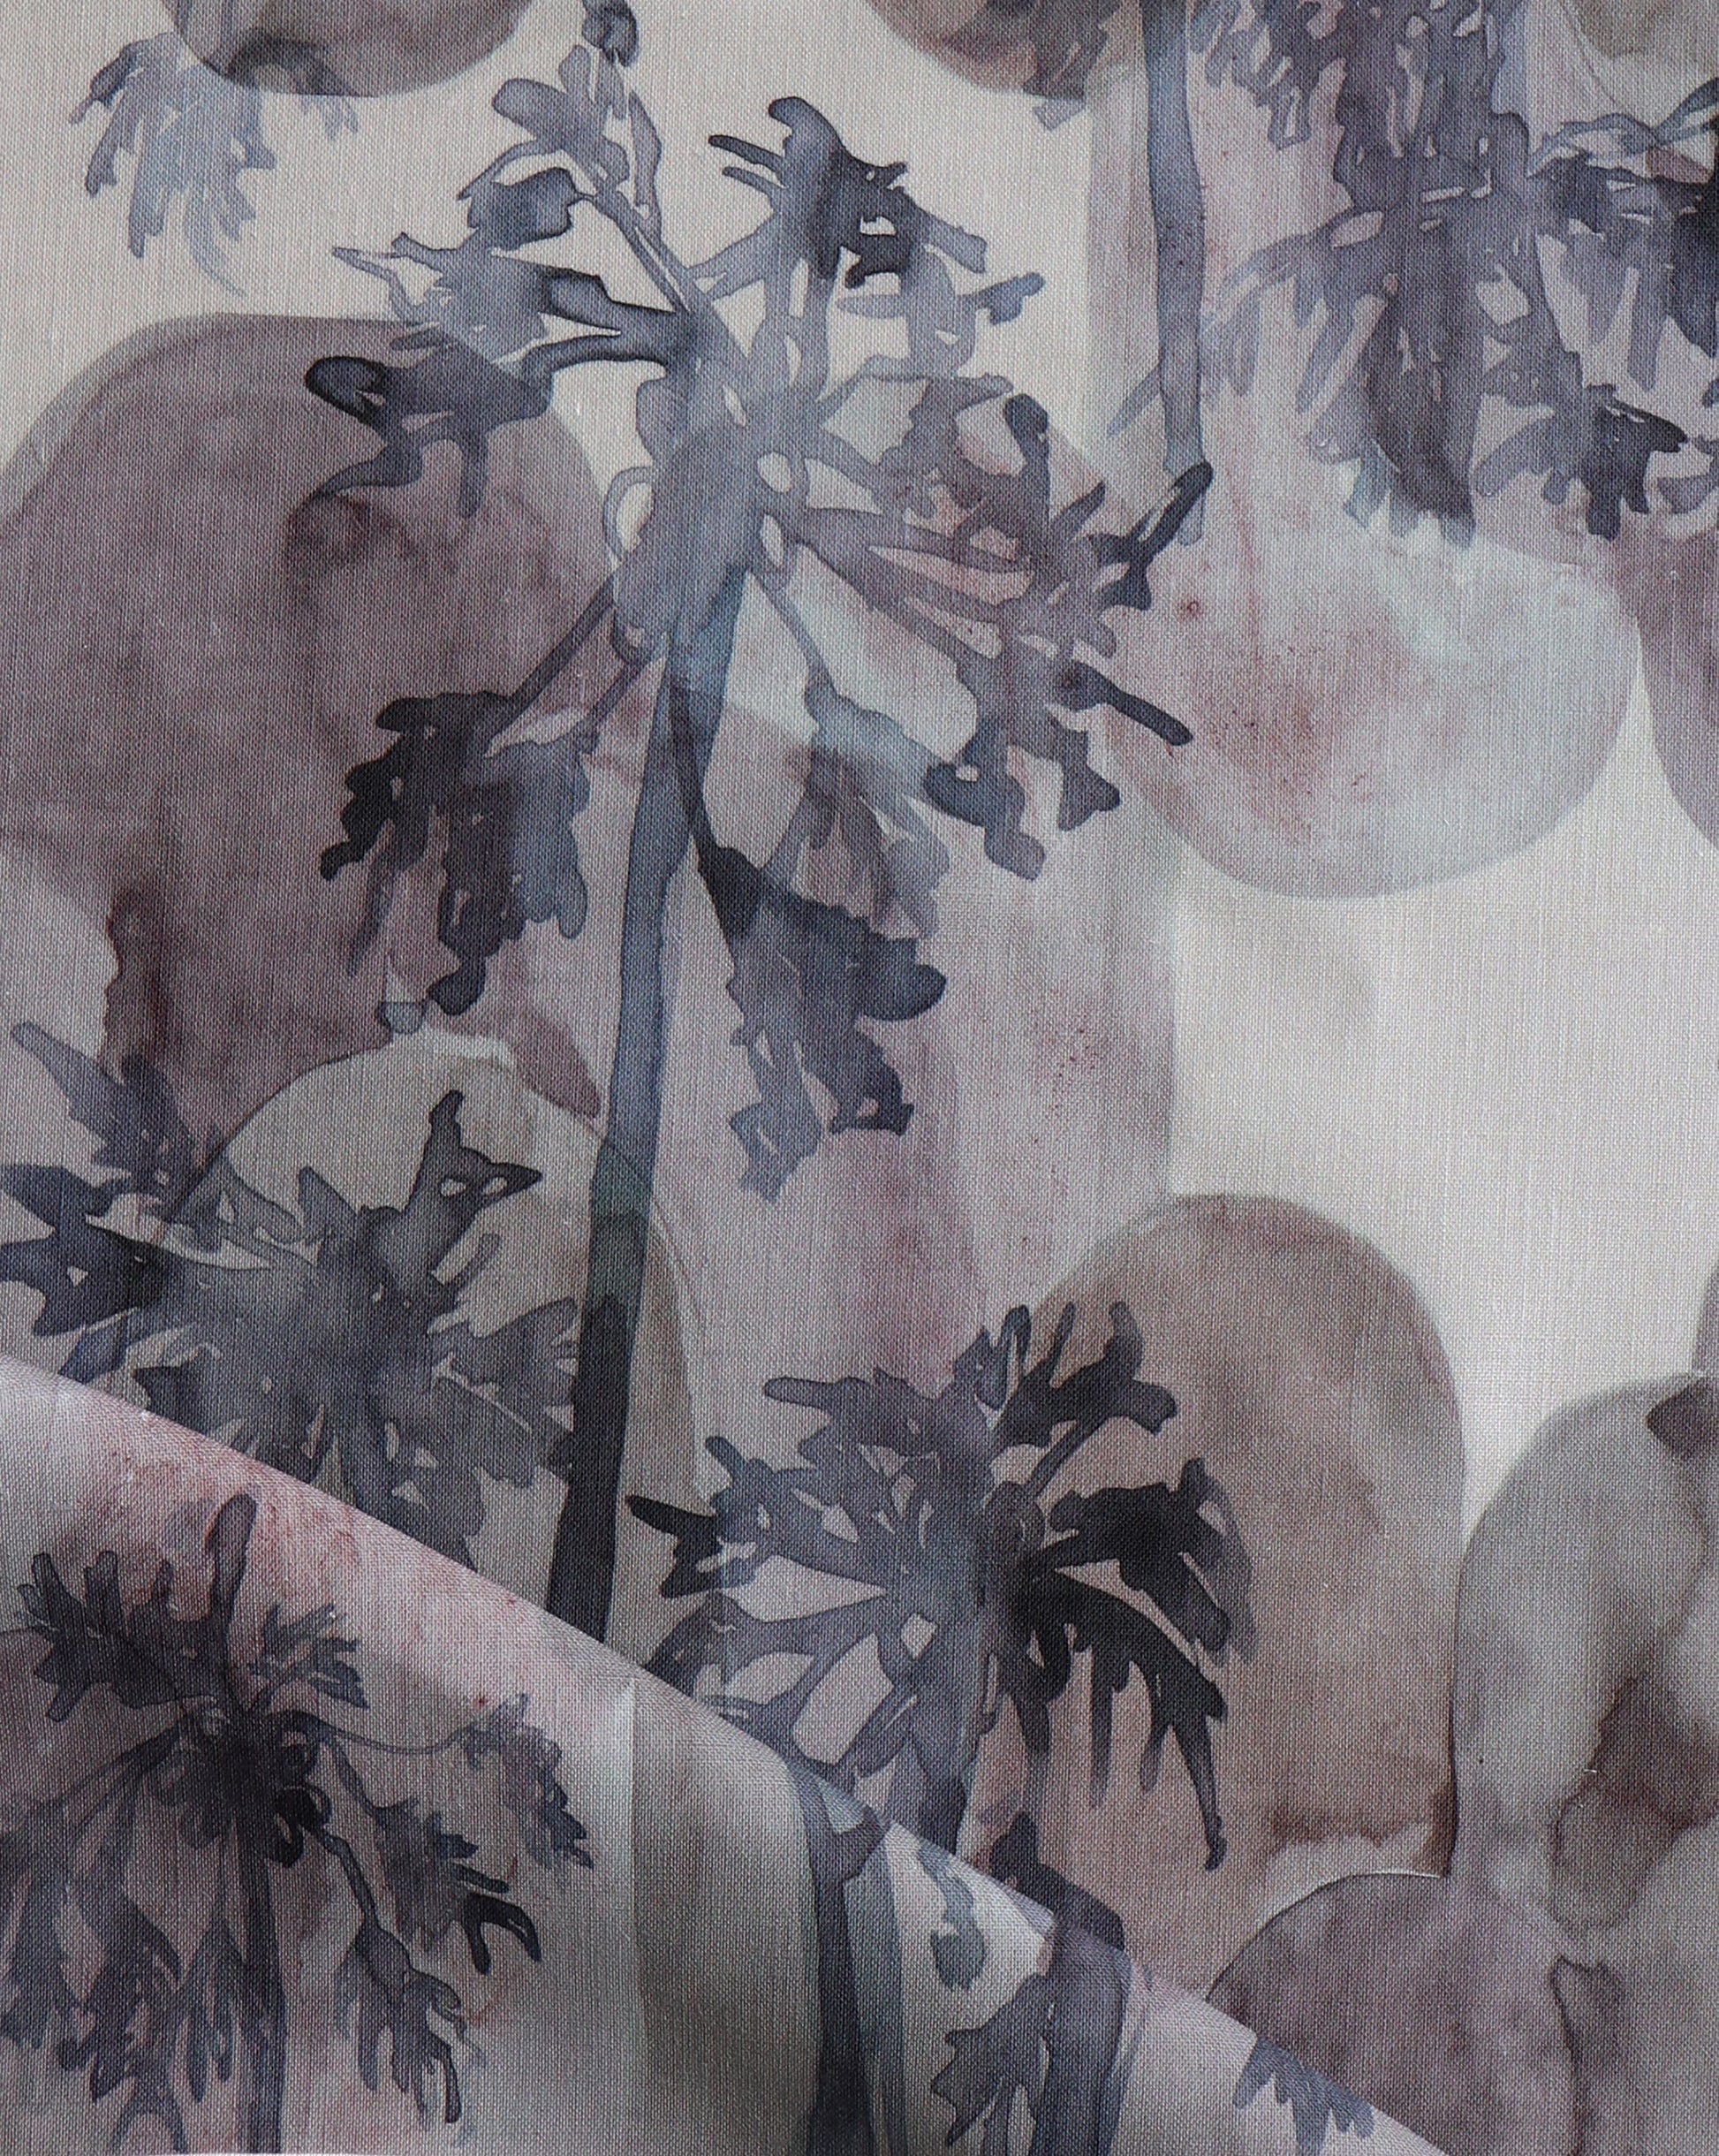 Depicting watercolor studies of a tropical tree, Papaya Arc fabric in our Pomegranate colorway features blue, purple and grey